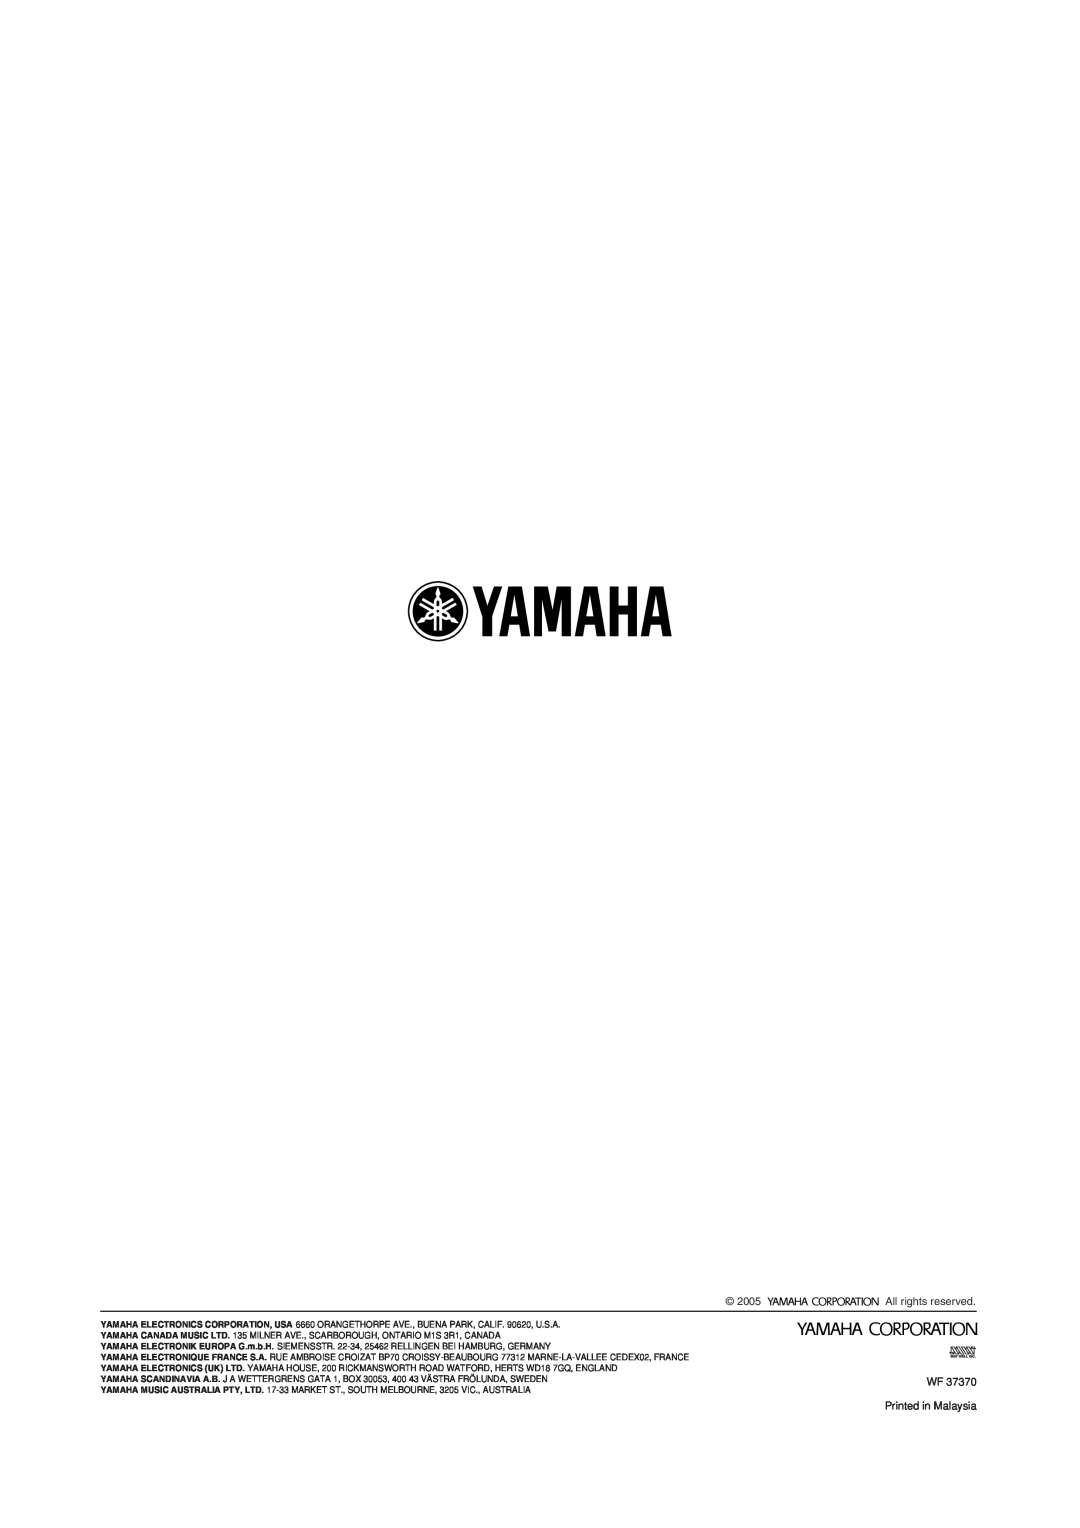 Yamaha MCX-2000 setup guide All rights reserved, WF 37370 Printed in Malaysia 